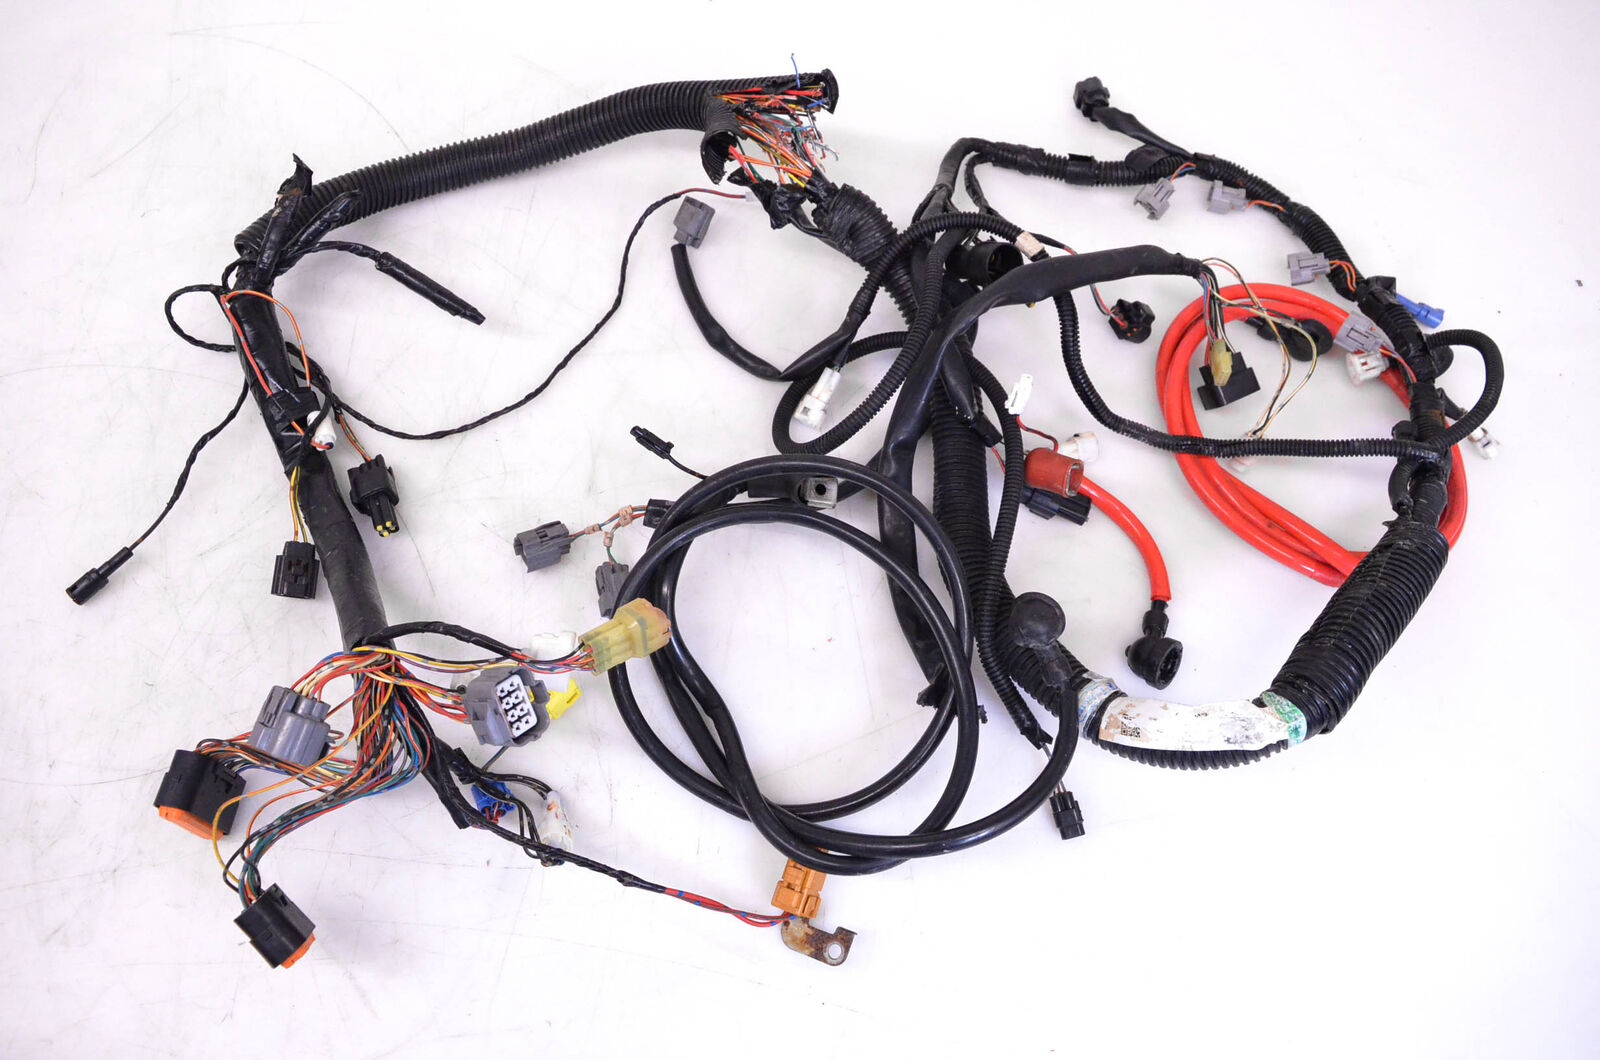 08 Kawasaki Ultra 250x Wire Harness Electrical Wiring Jt1500 For Parts